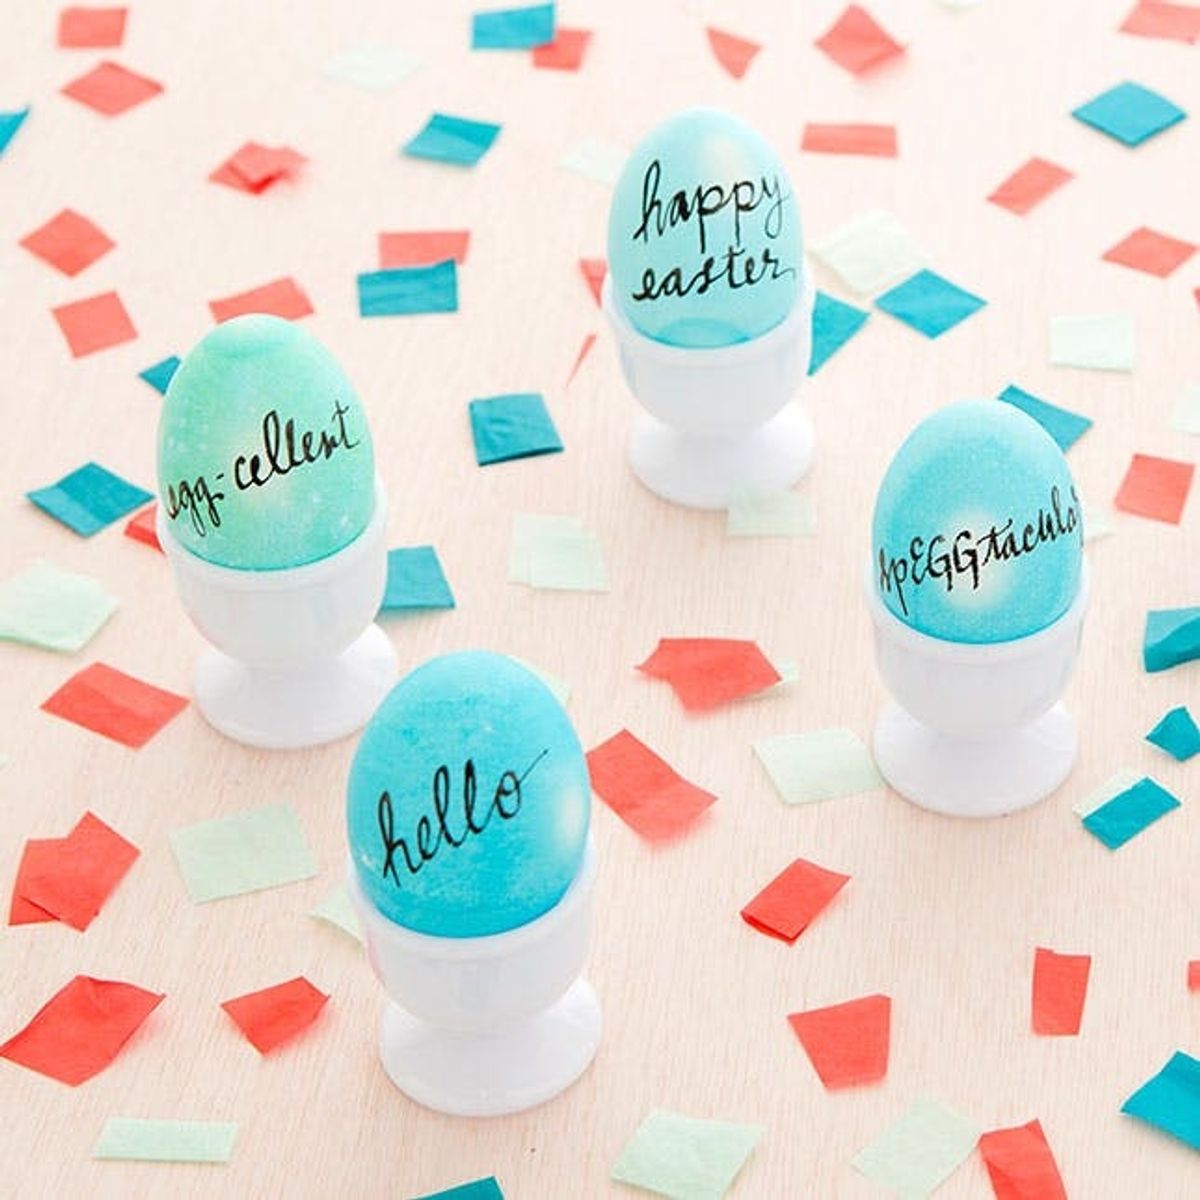 How to Make Calligraphy Easter Eggs